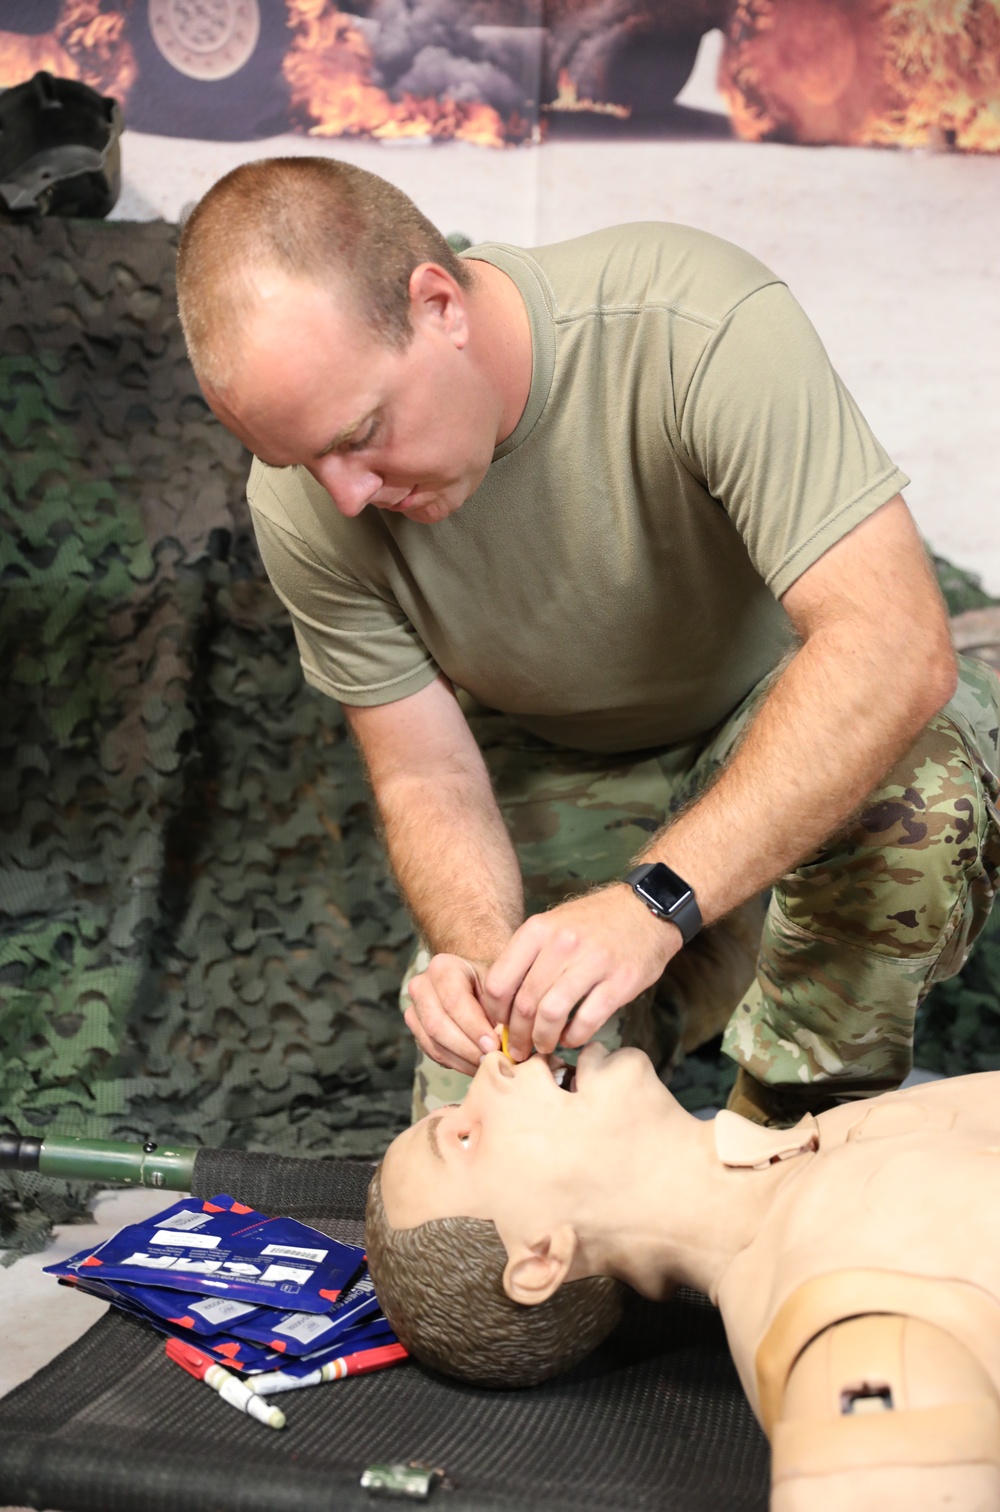 Task Force Orion Conducts Combat Lifesaver Training